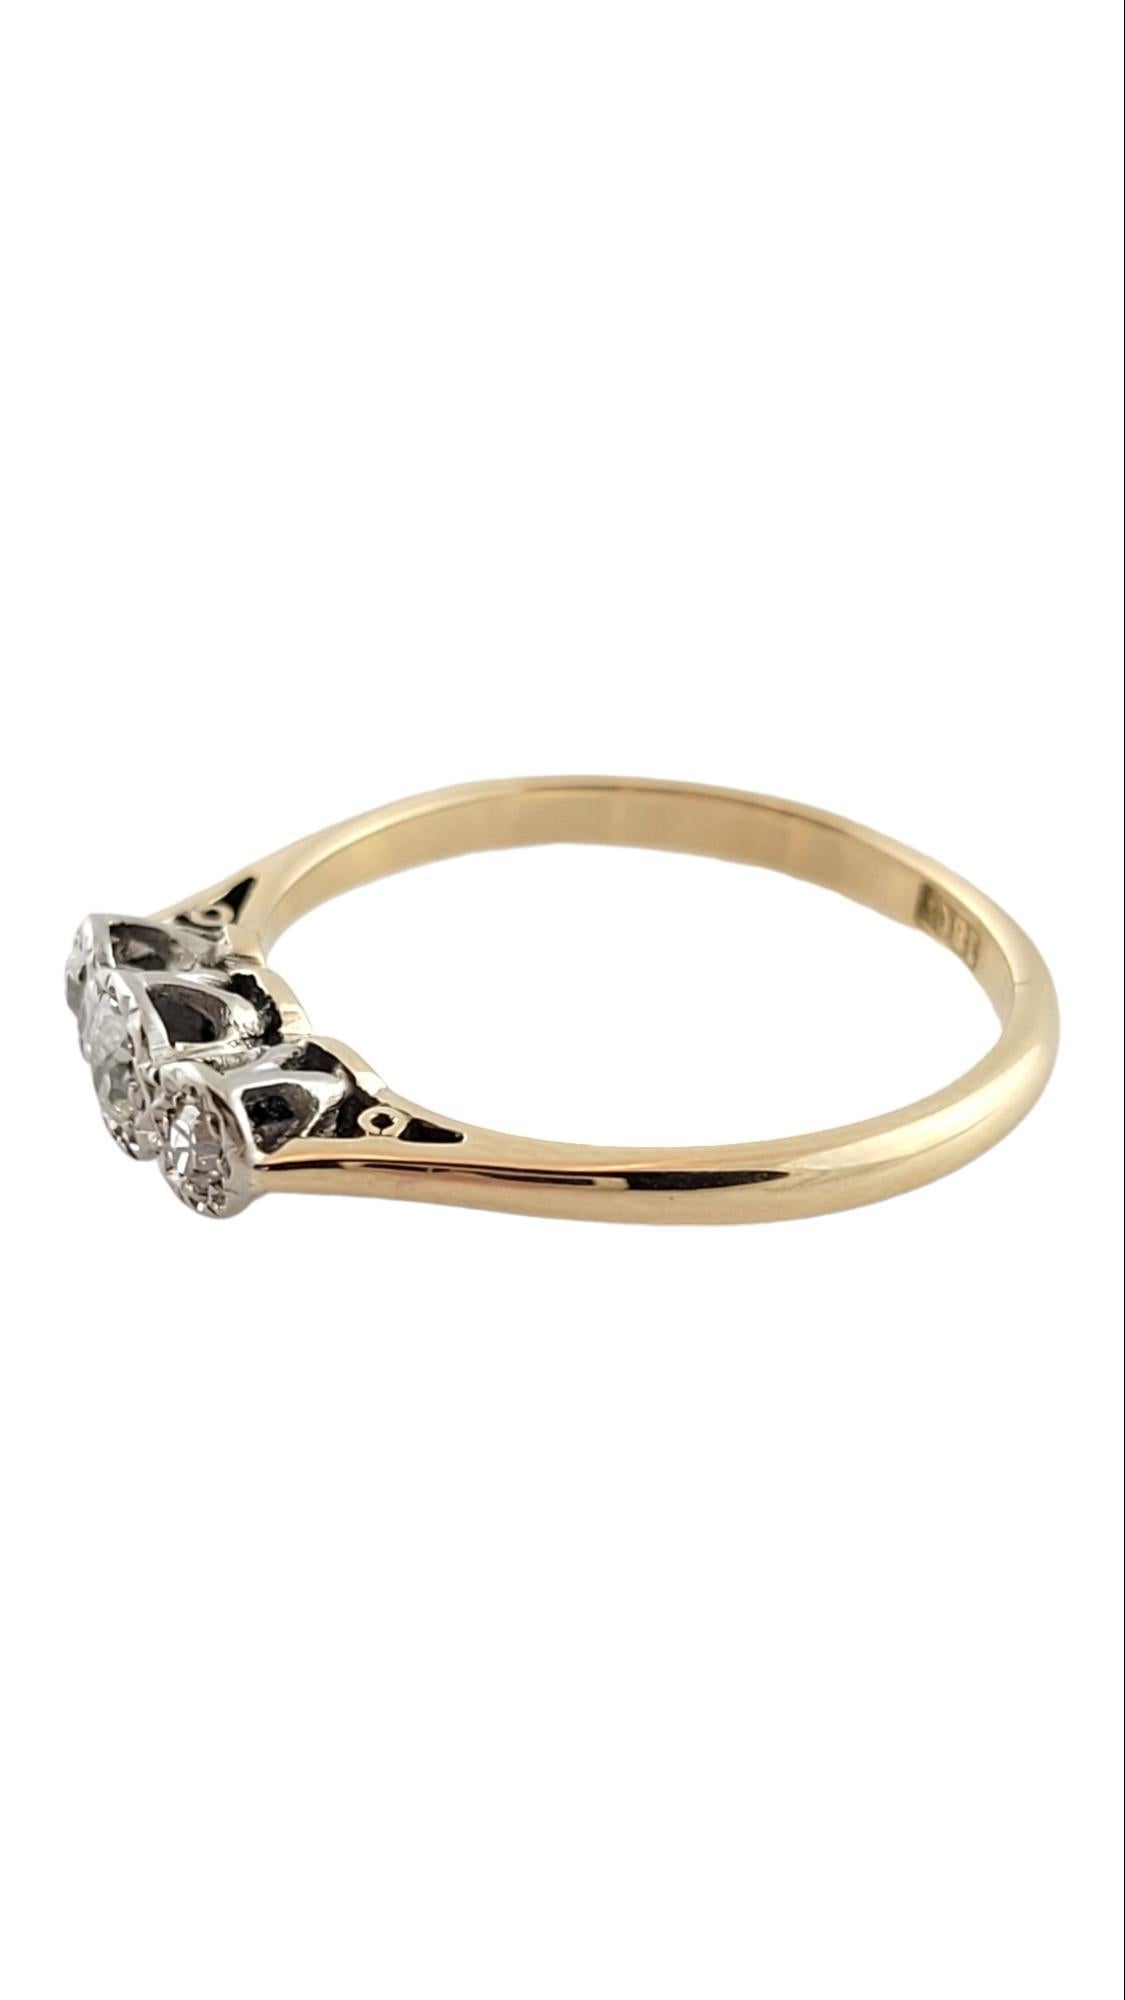 Vintage 18K Yellow Gold Diamond Ring Size 7.25

This gorgeous ring feature 3 sparkling, European cut diamonds set in an 18K yellow gold band!

Approximate total diamond weight: .16 cts

Diamond color: K-L

Diamond clarity: I1

Ring size: 7.25
Shank: